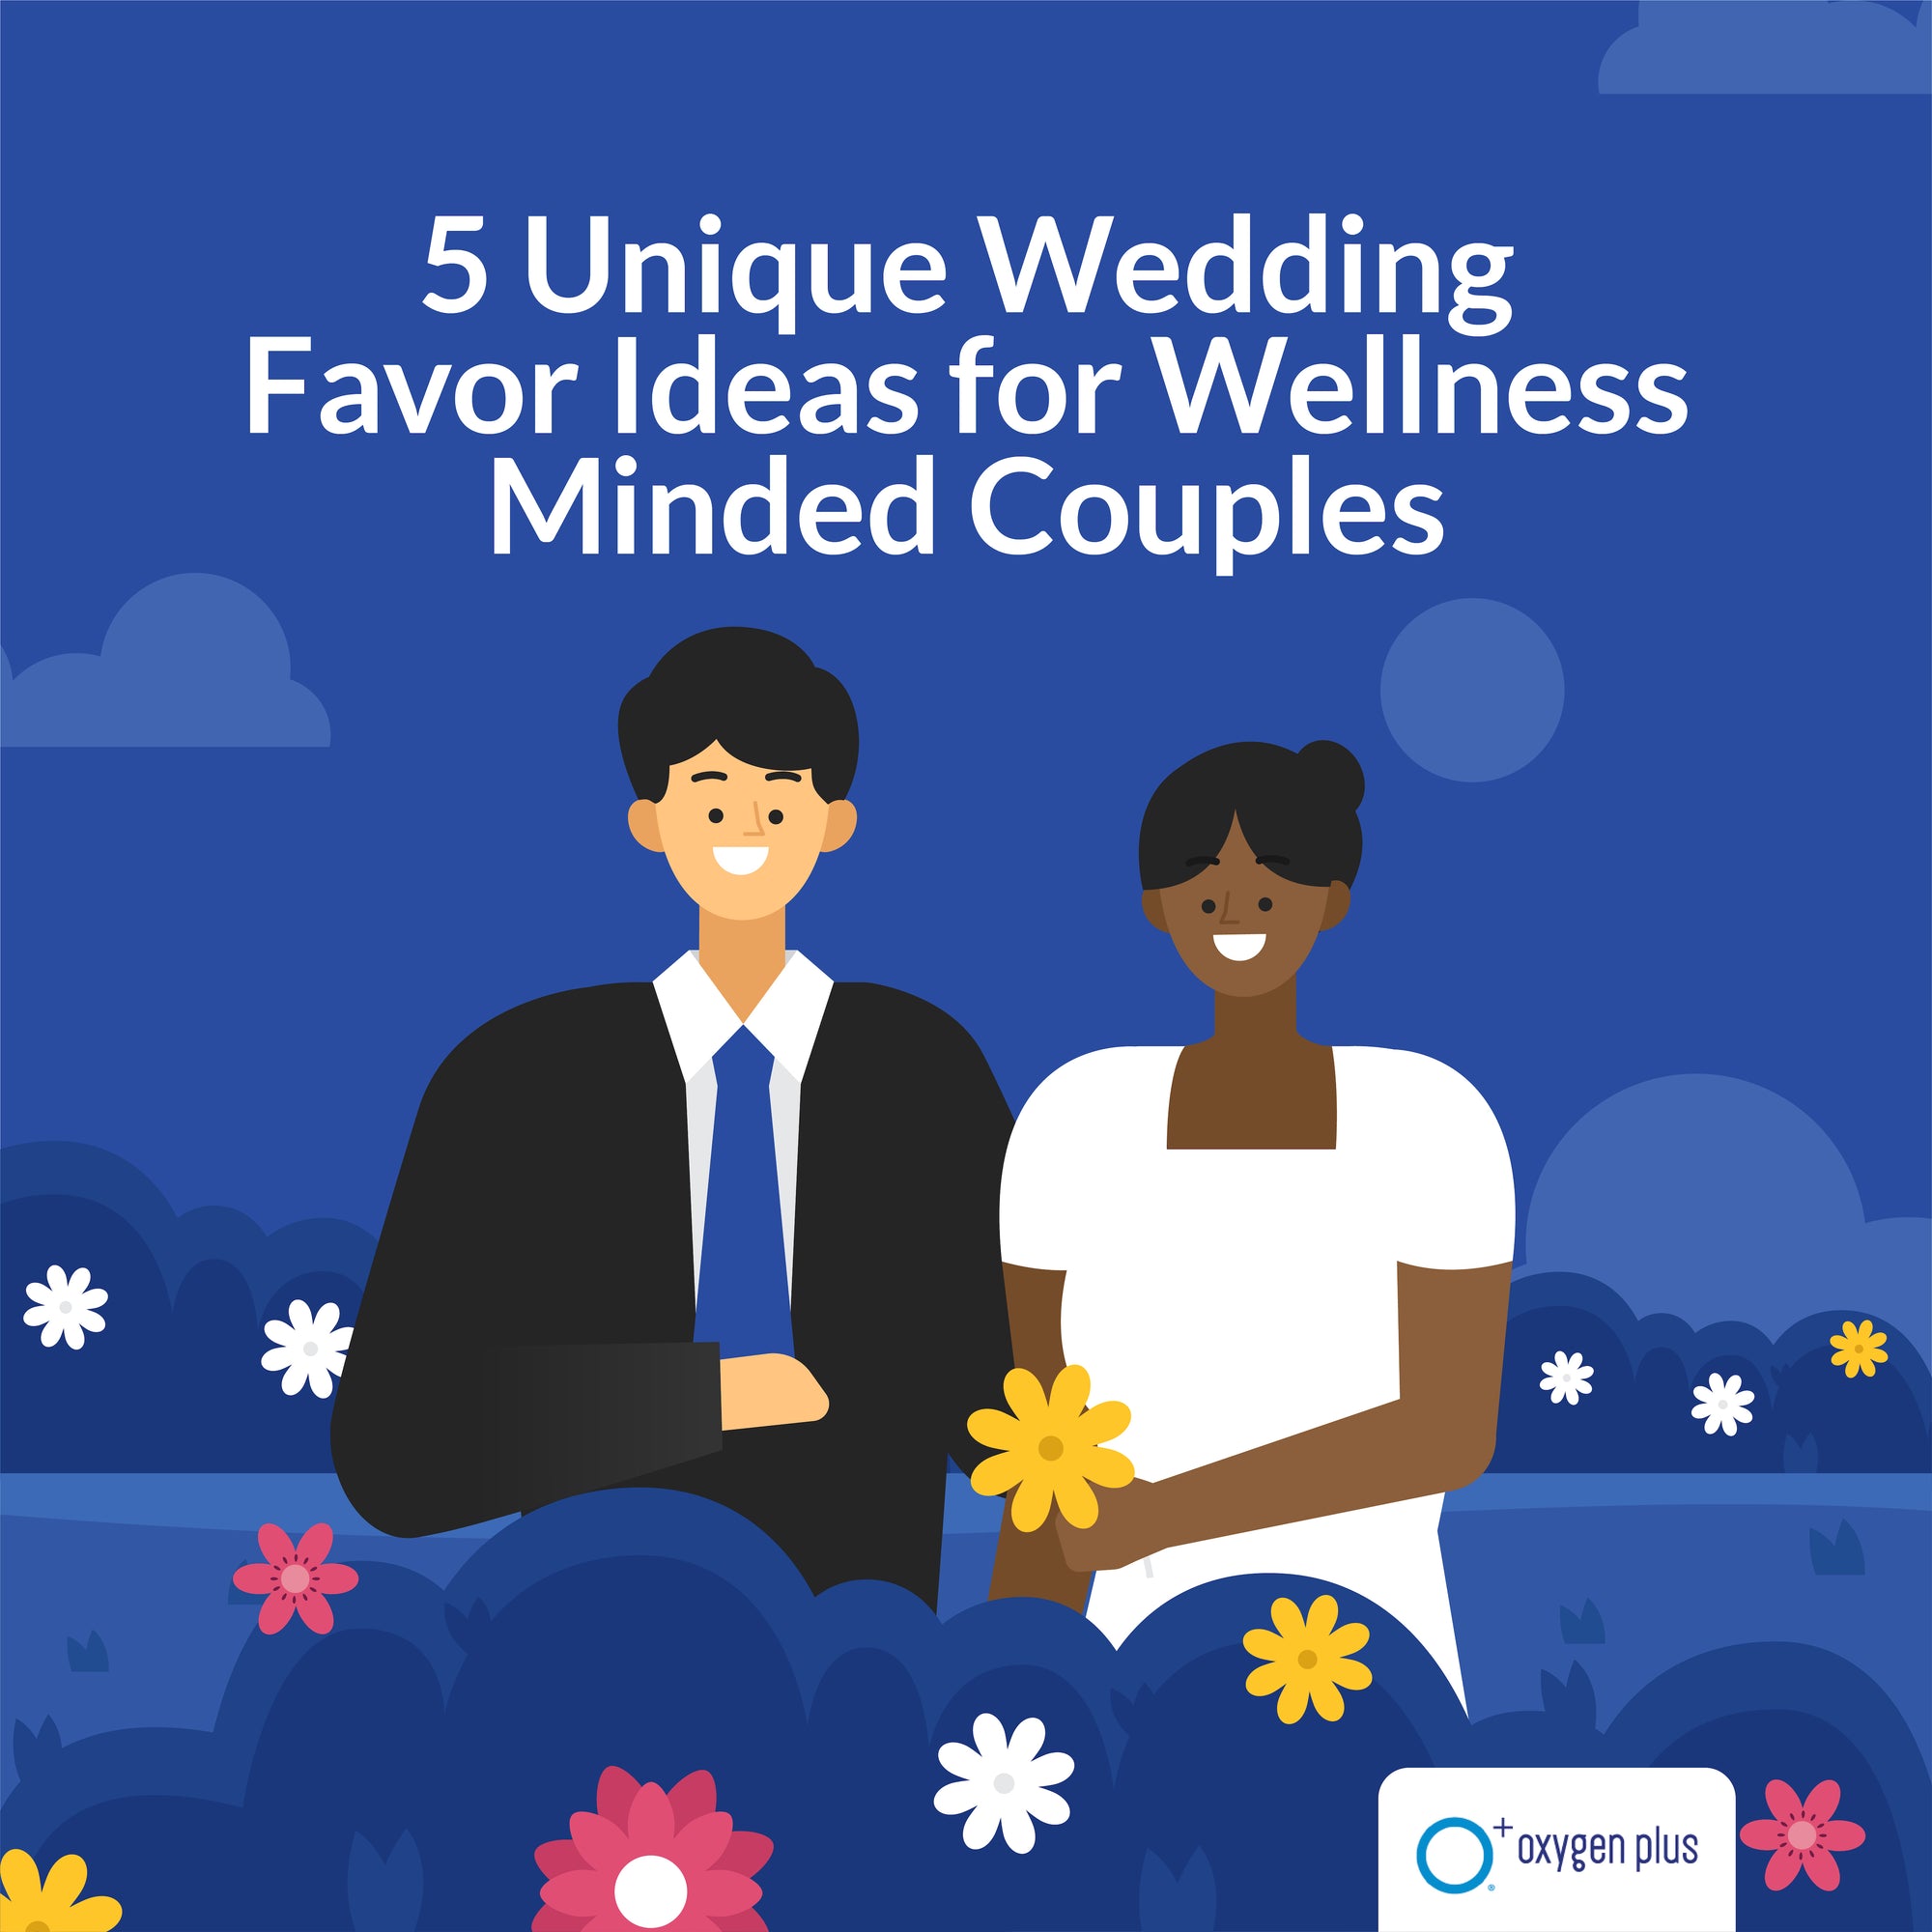 5 Unique Wedding Favor Ideas for Wellness-Minded Couples